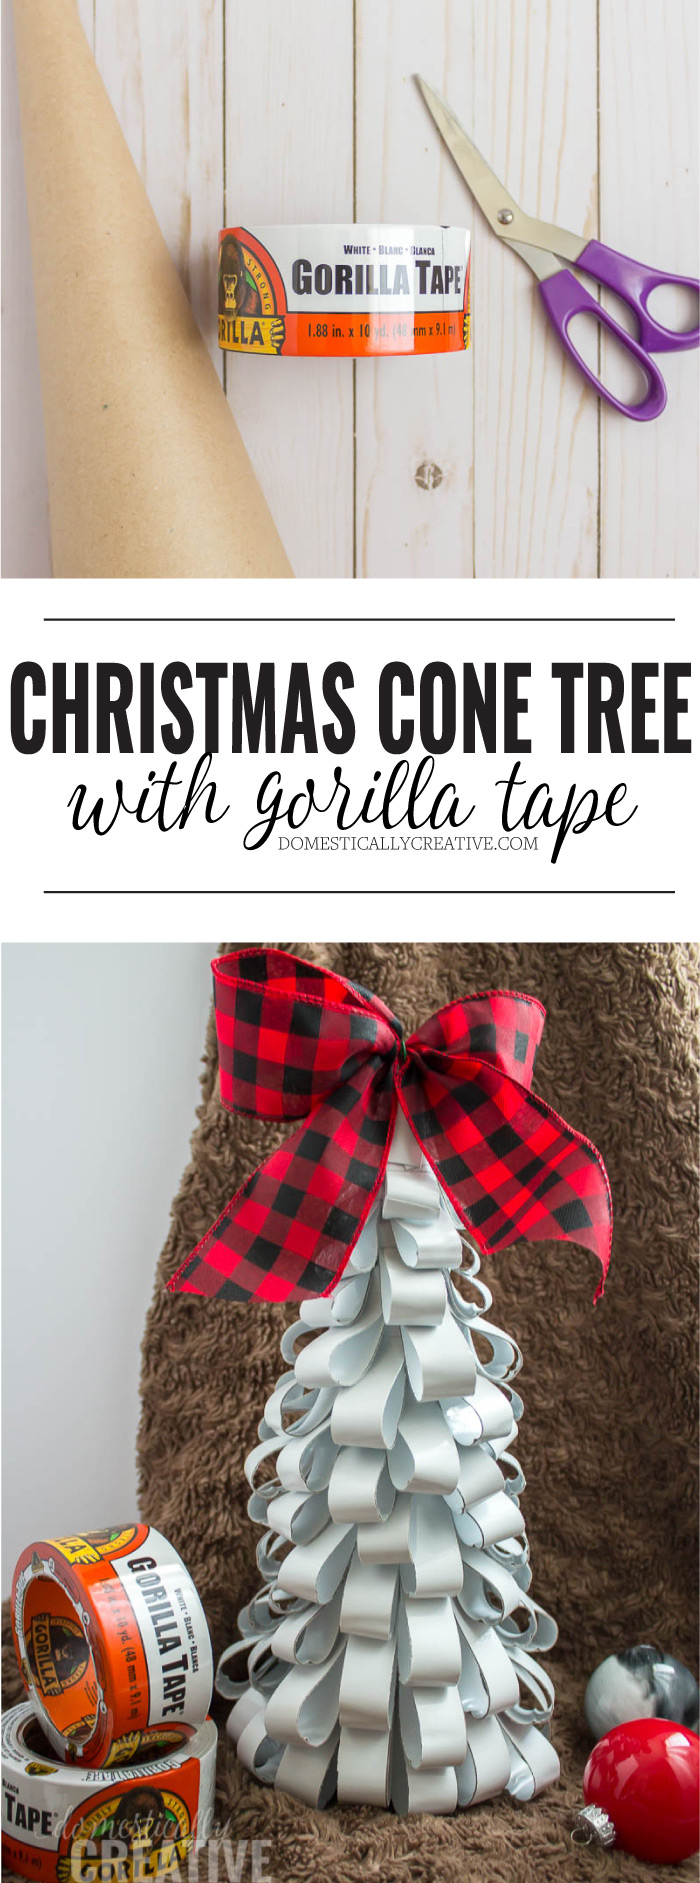 DIY Christmas Cone Tree made only with Gorilla Tape! You have to see this!